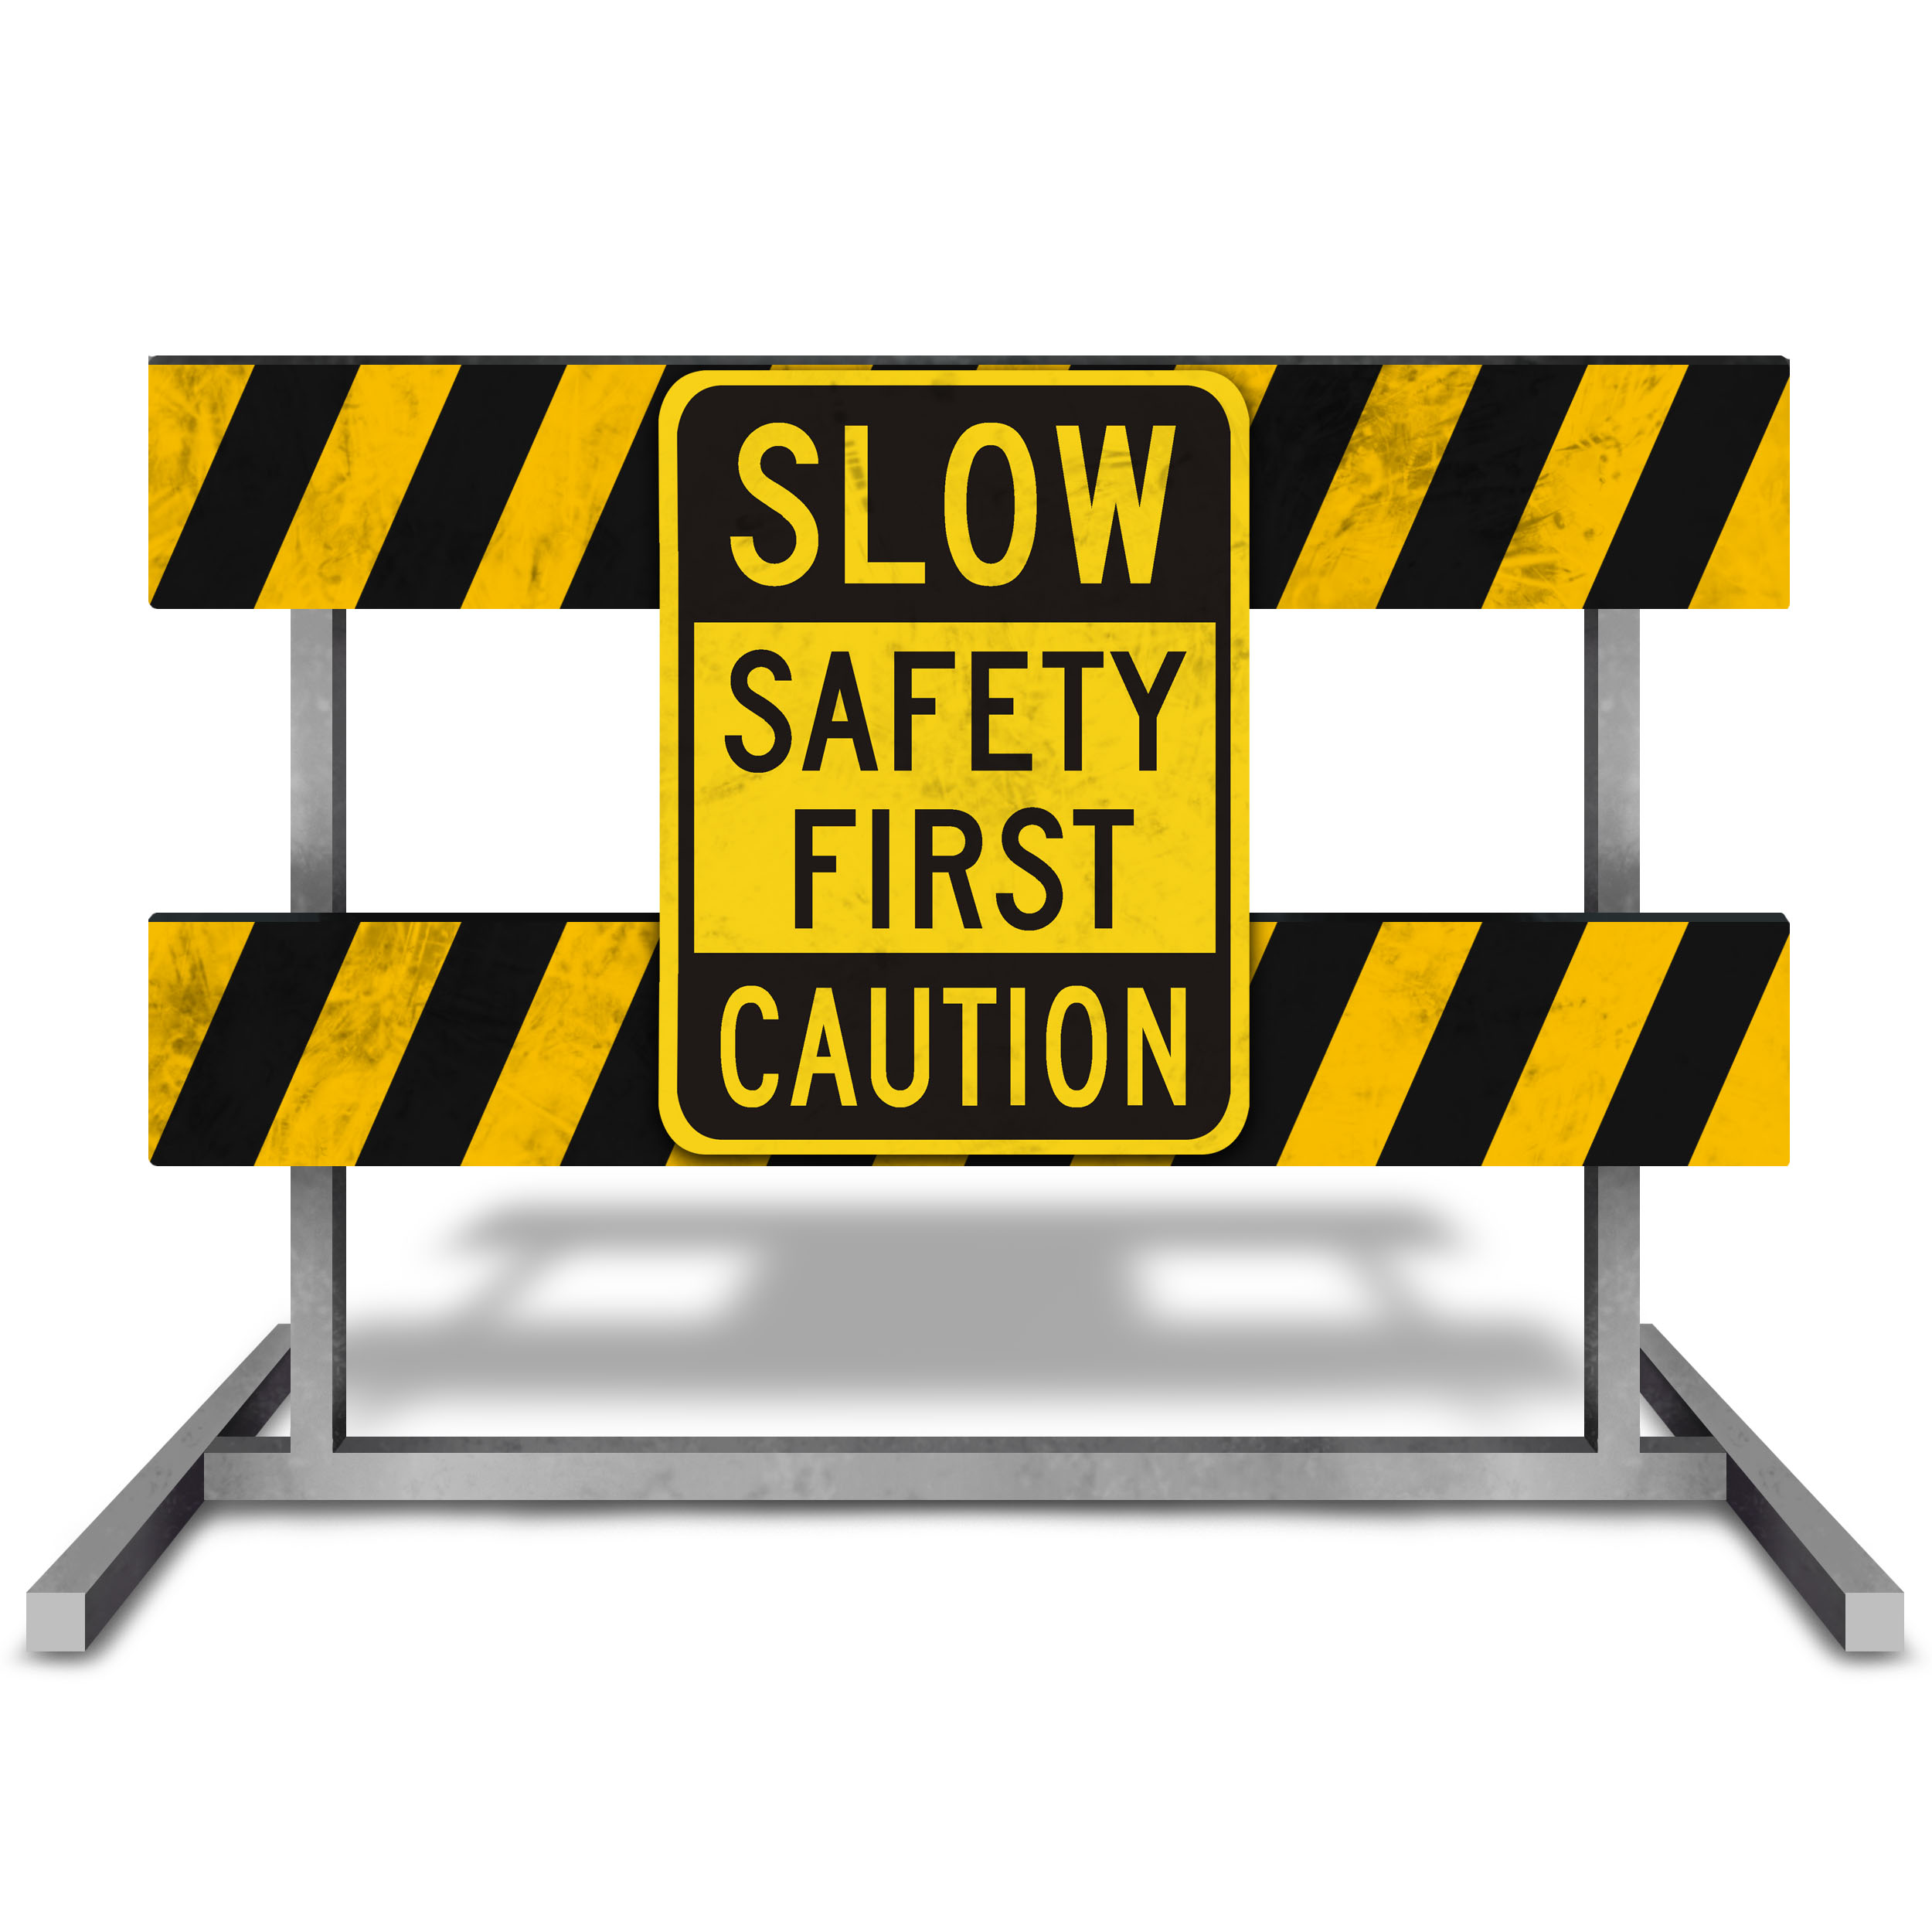 safety first silvey whitepaper image